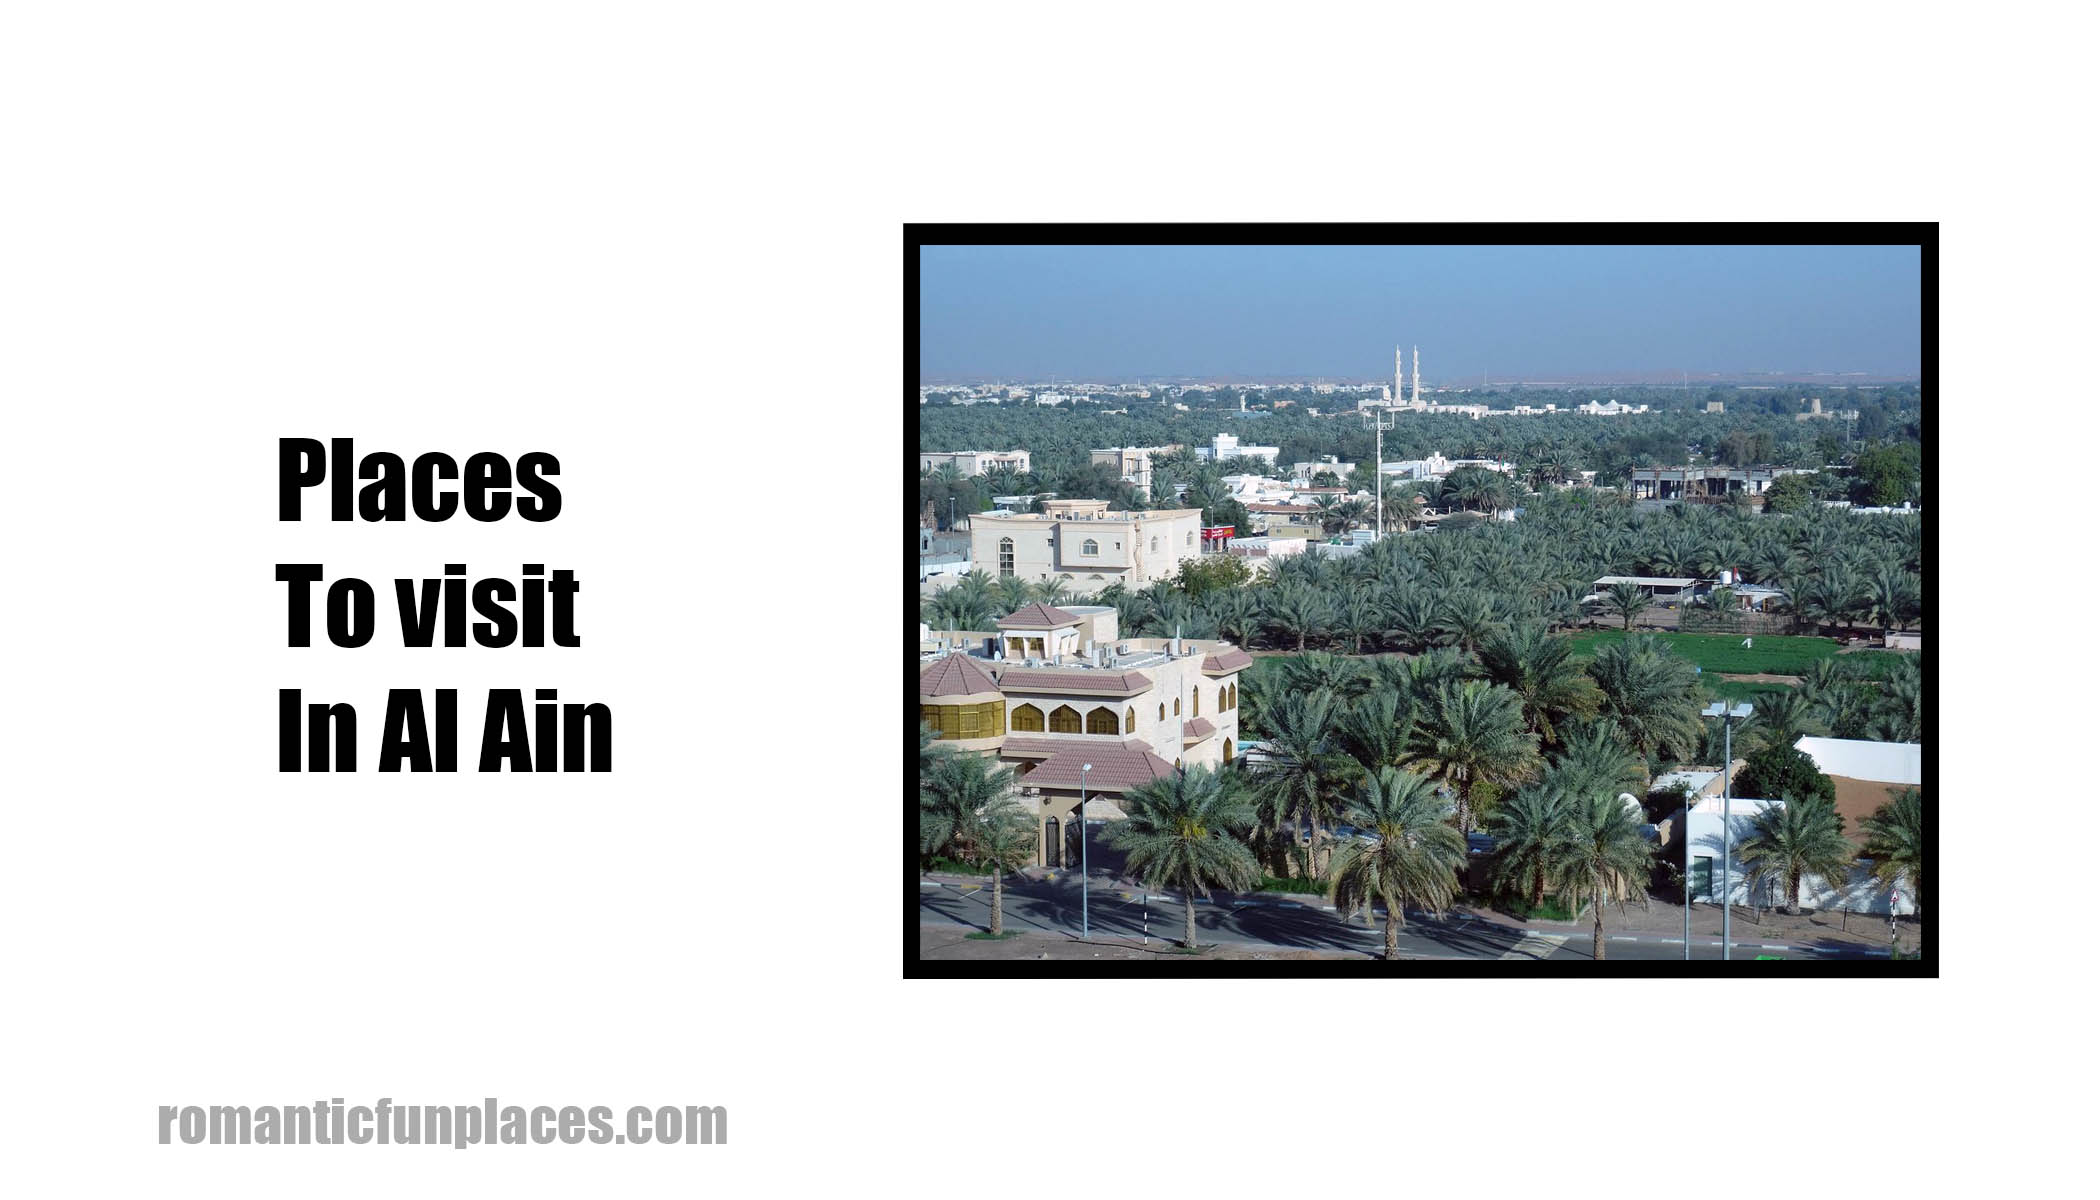 Places to visit in Al Ain